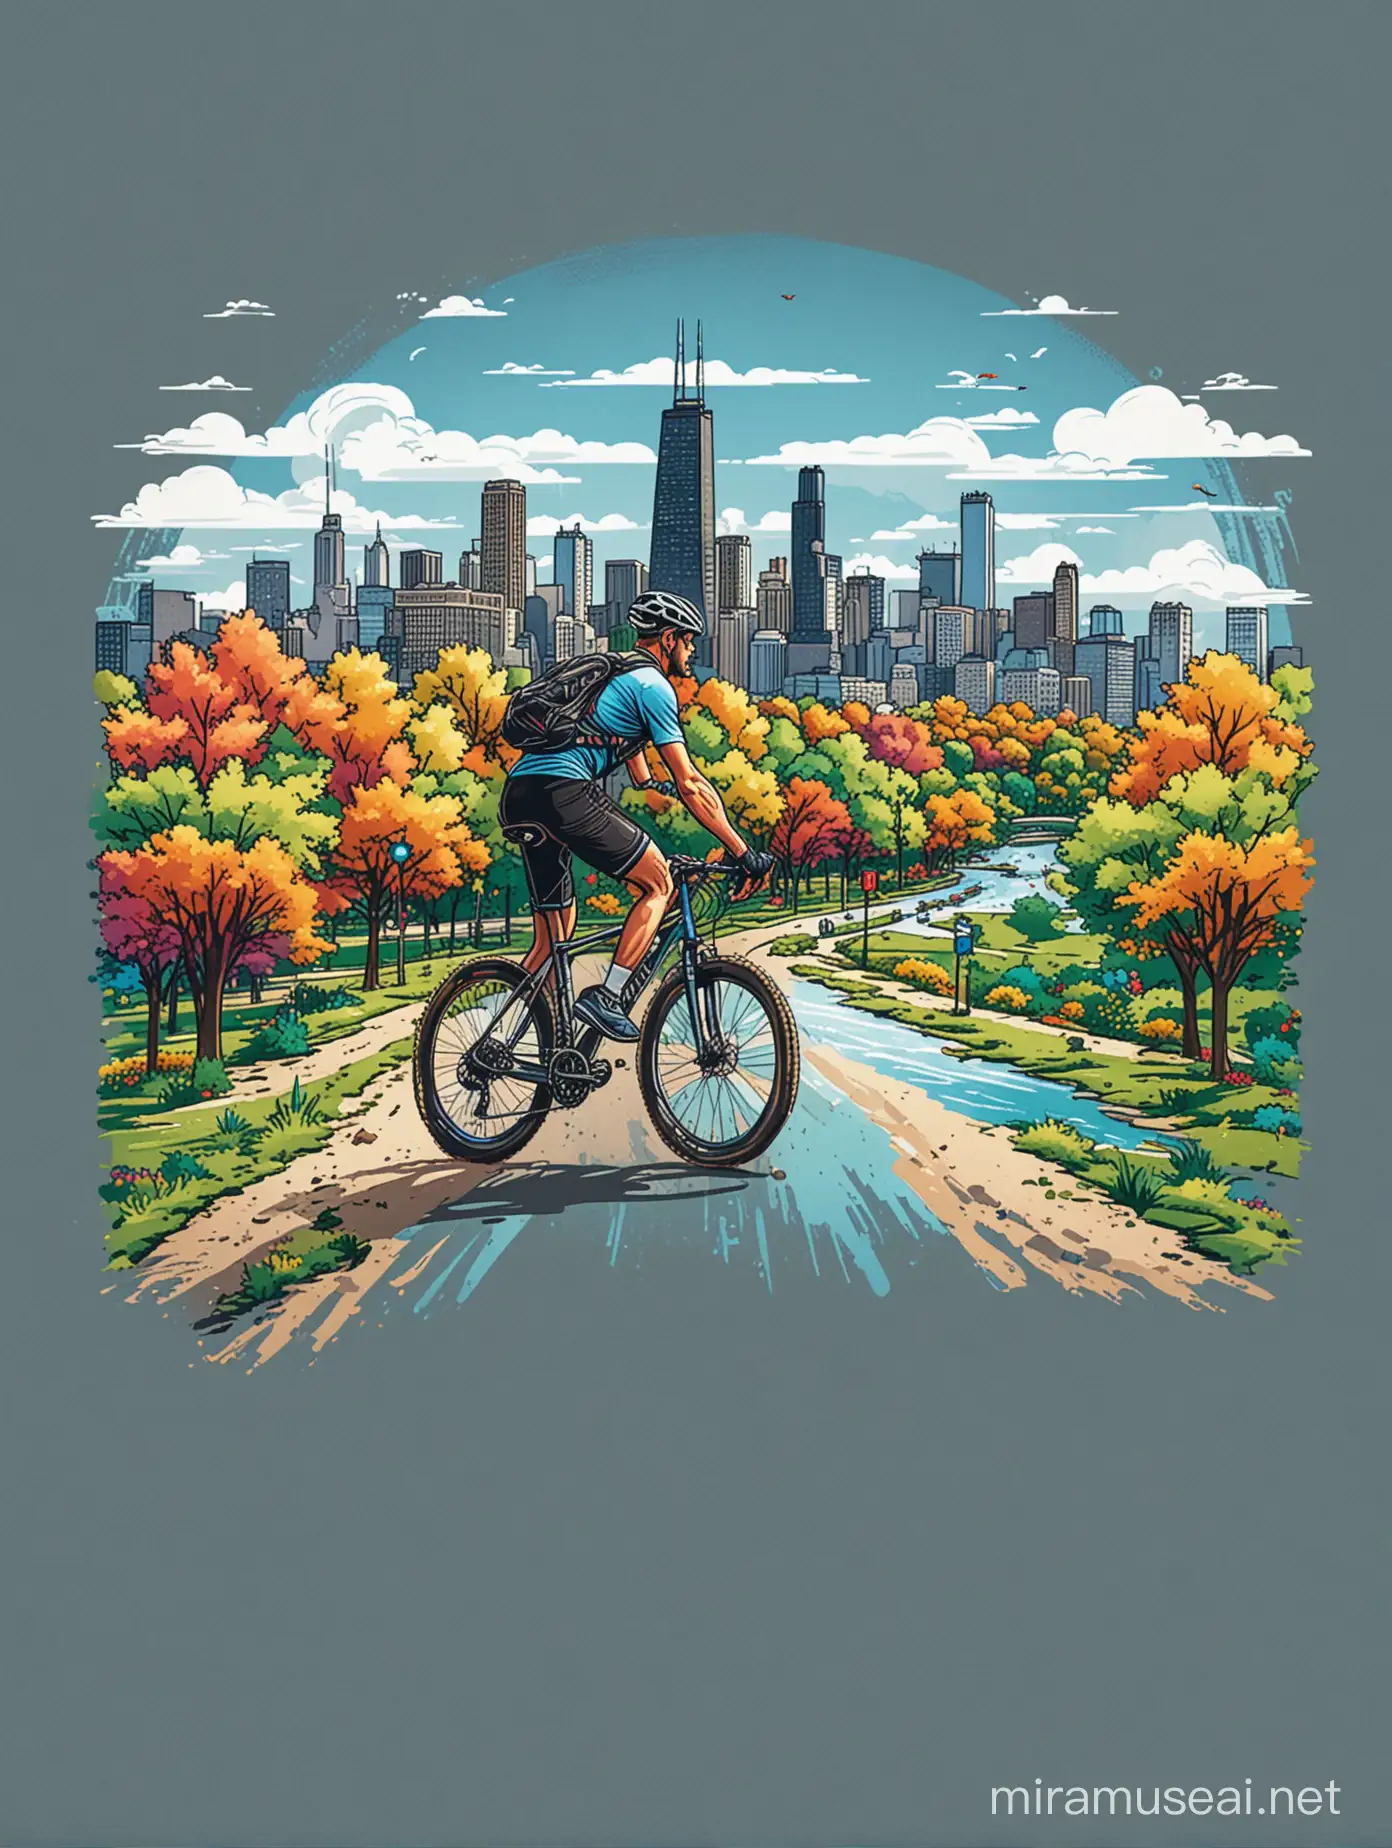 Create_an_exhilarating_tshirt_design_capturing_a_cyclist_riding_on_trails_around_a_park_with Chicago_skyline_300dpi_colorful